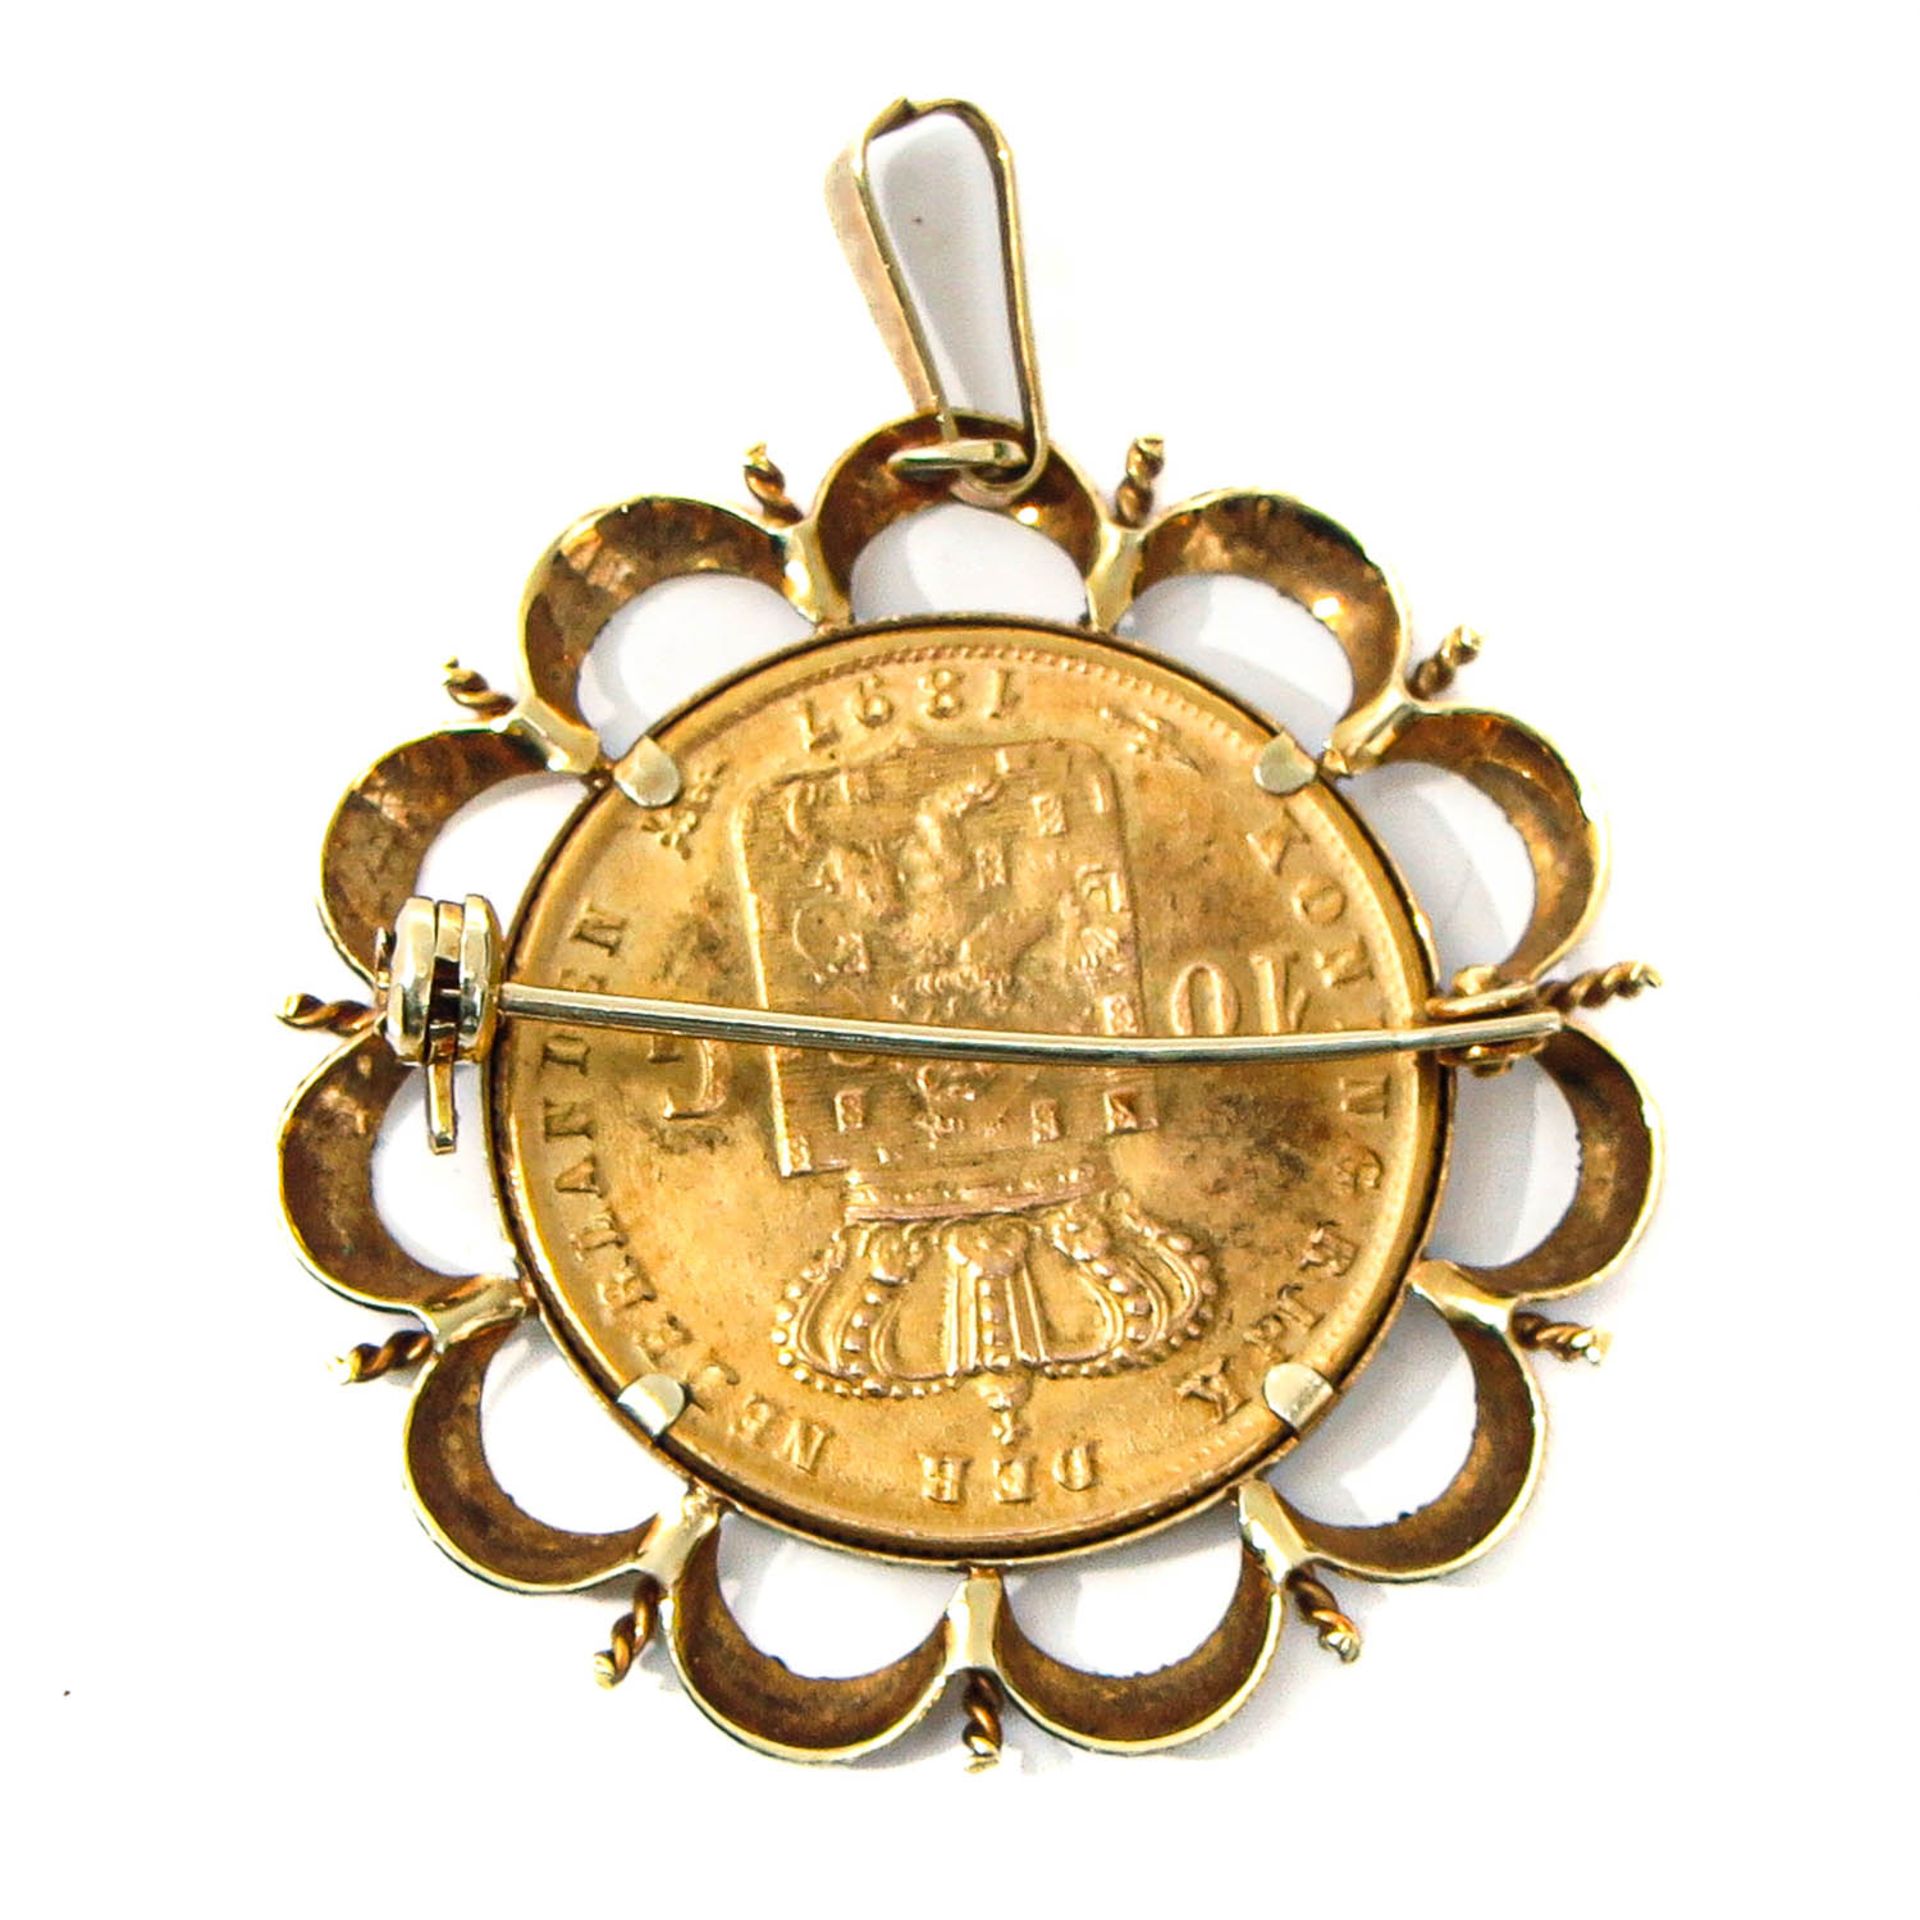 A 10 Guilder Gold Coin Brooch - Image 2 of 2